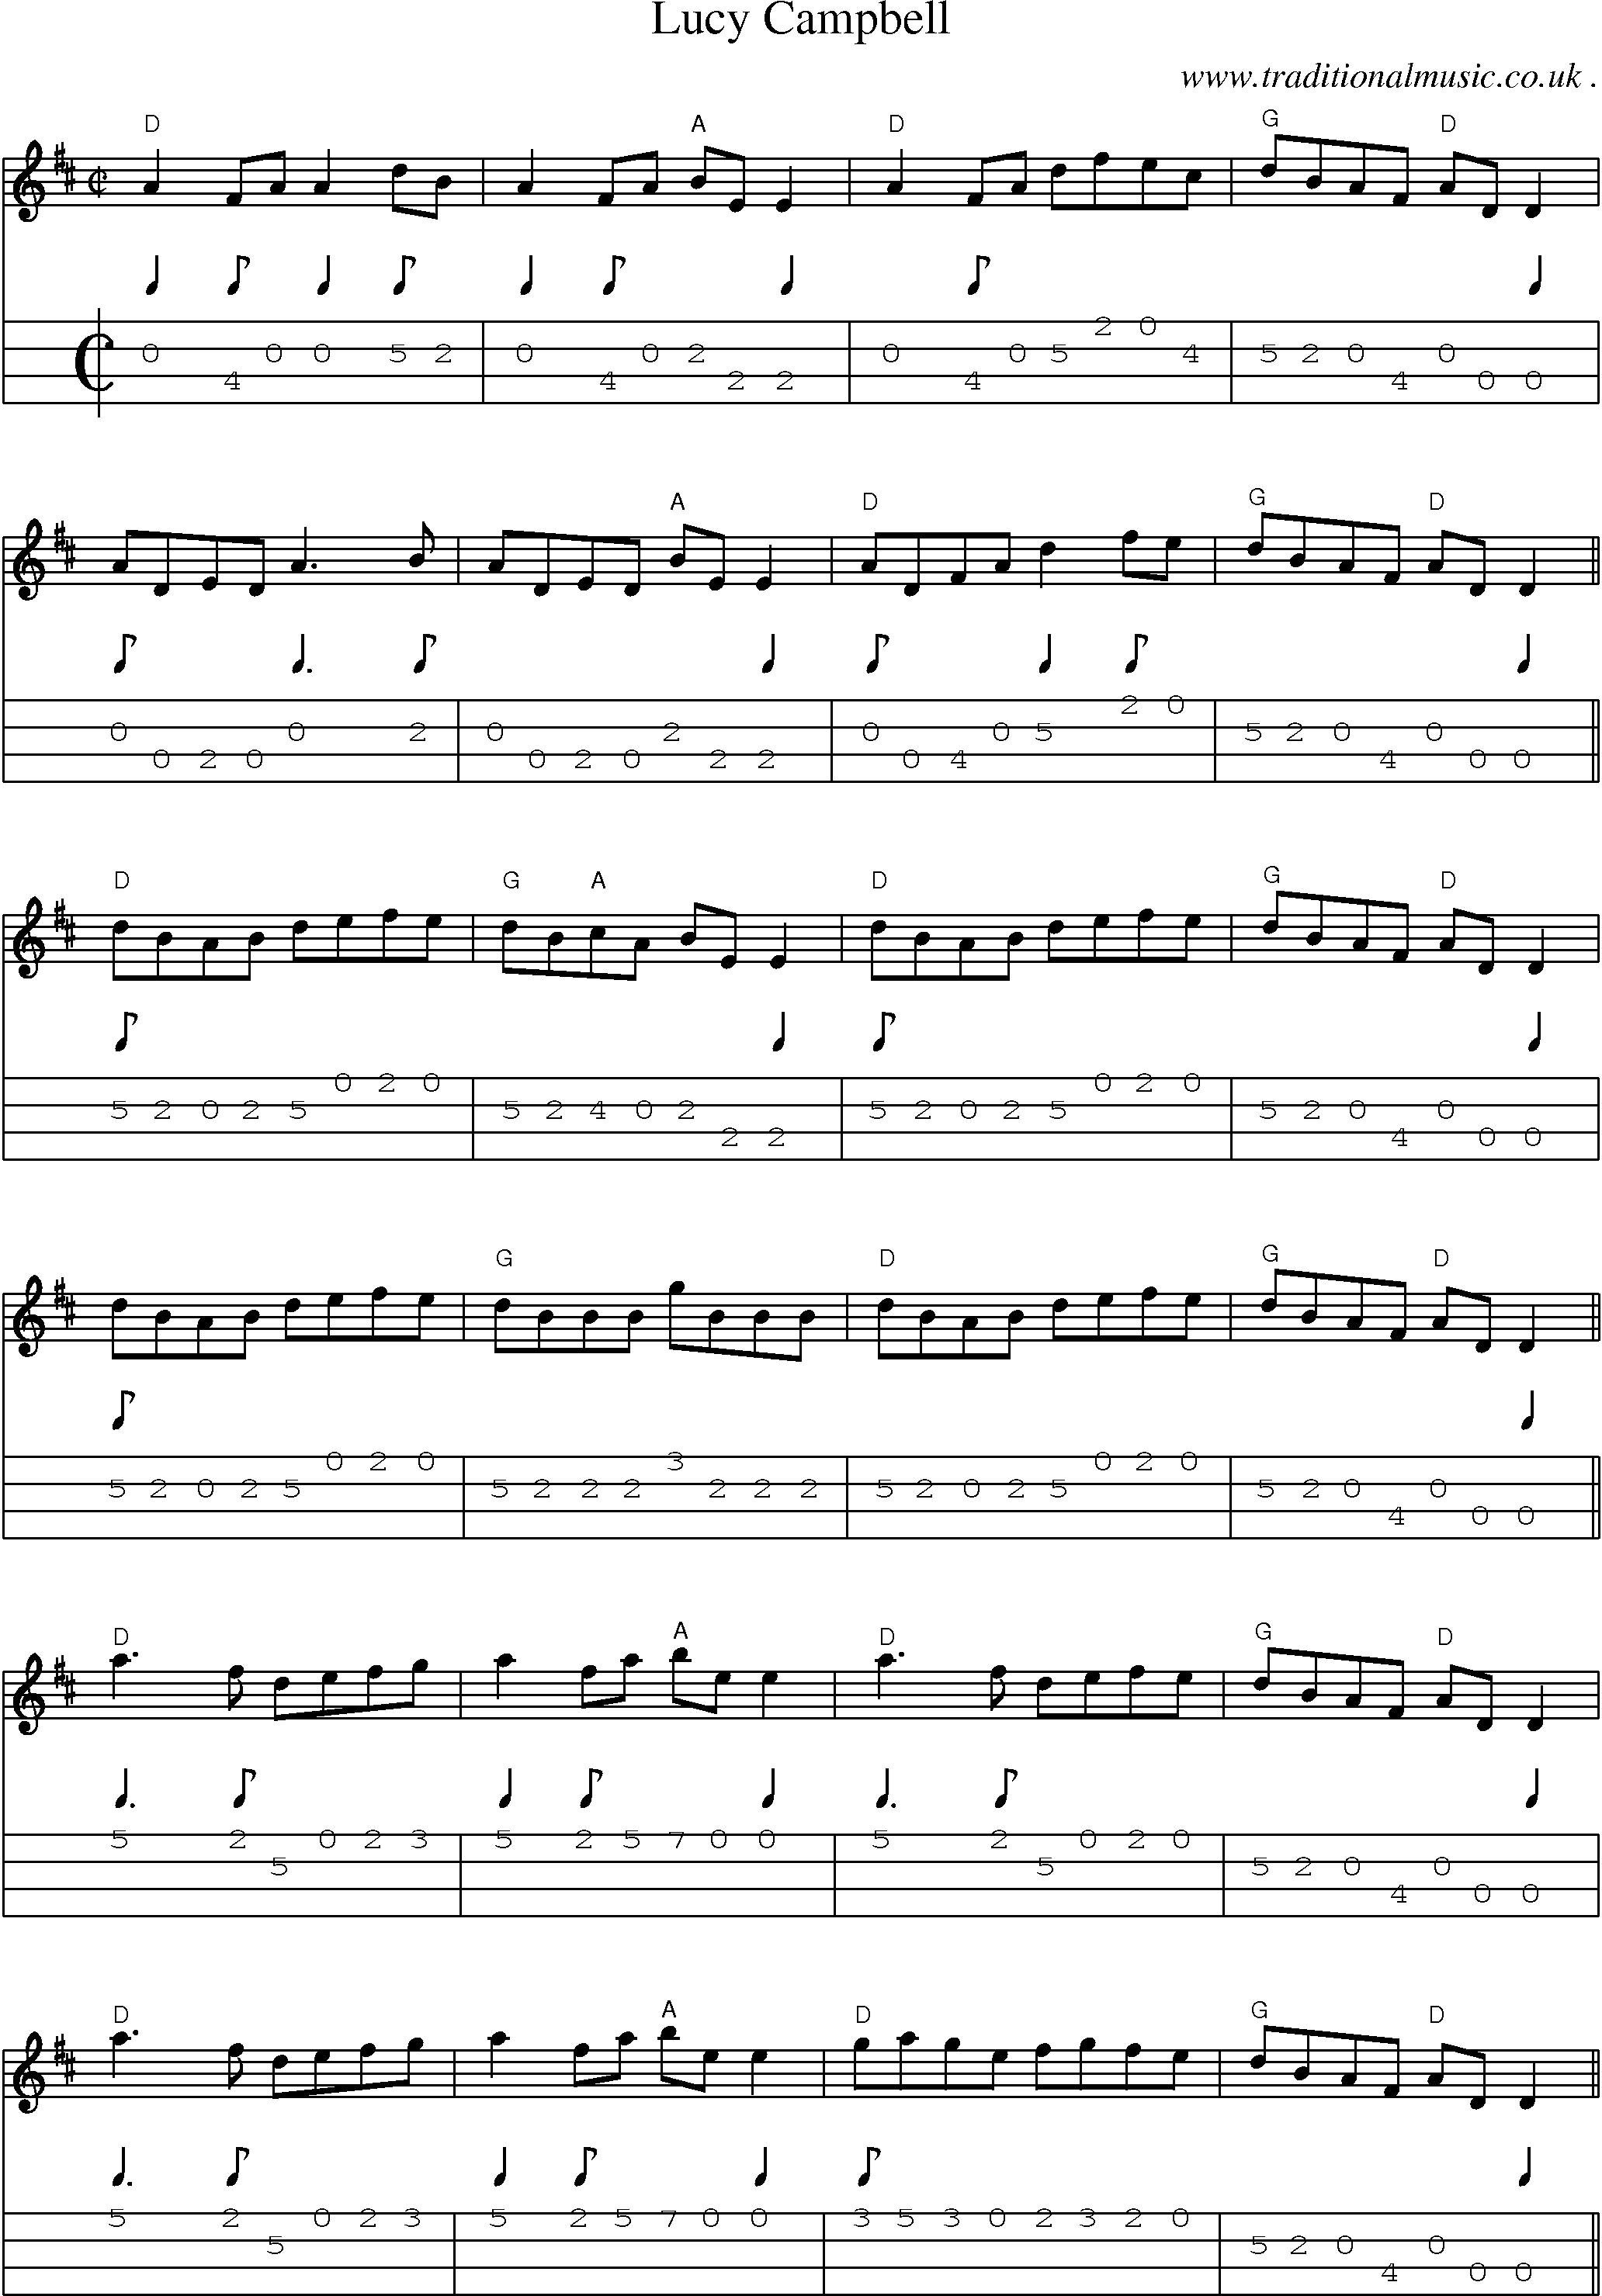 Music Score and Guitar Tabs for Lucy Campbell